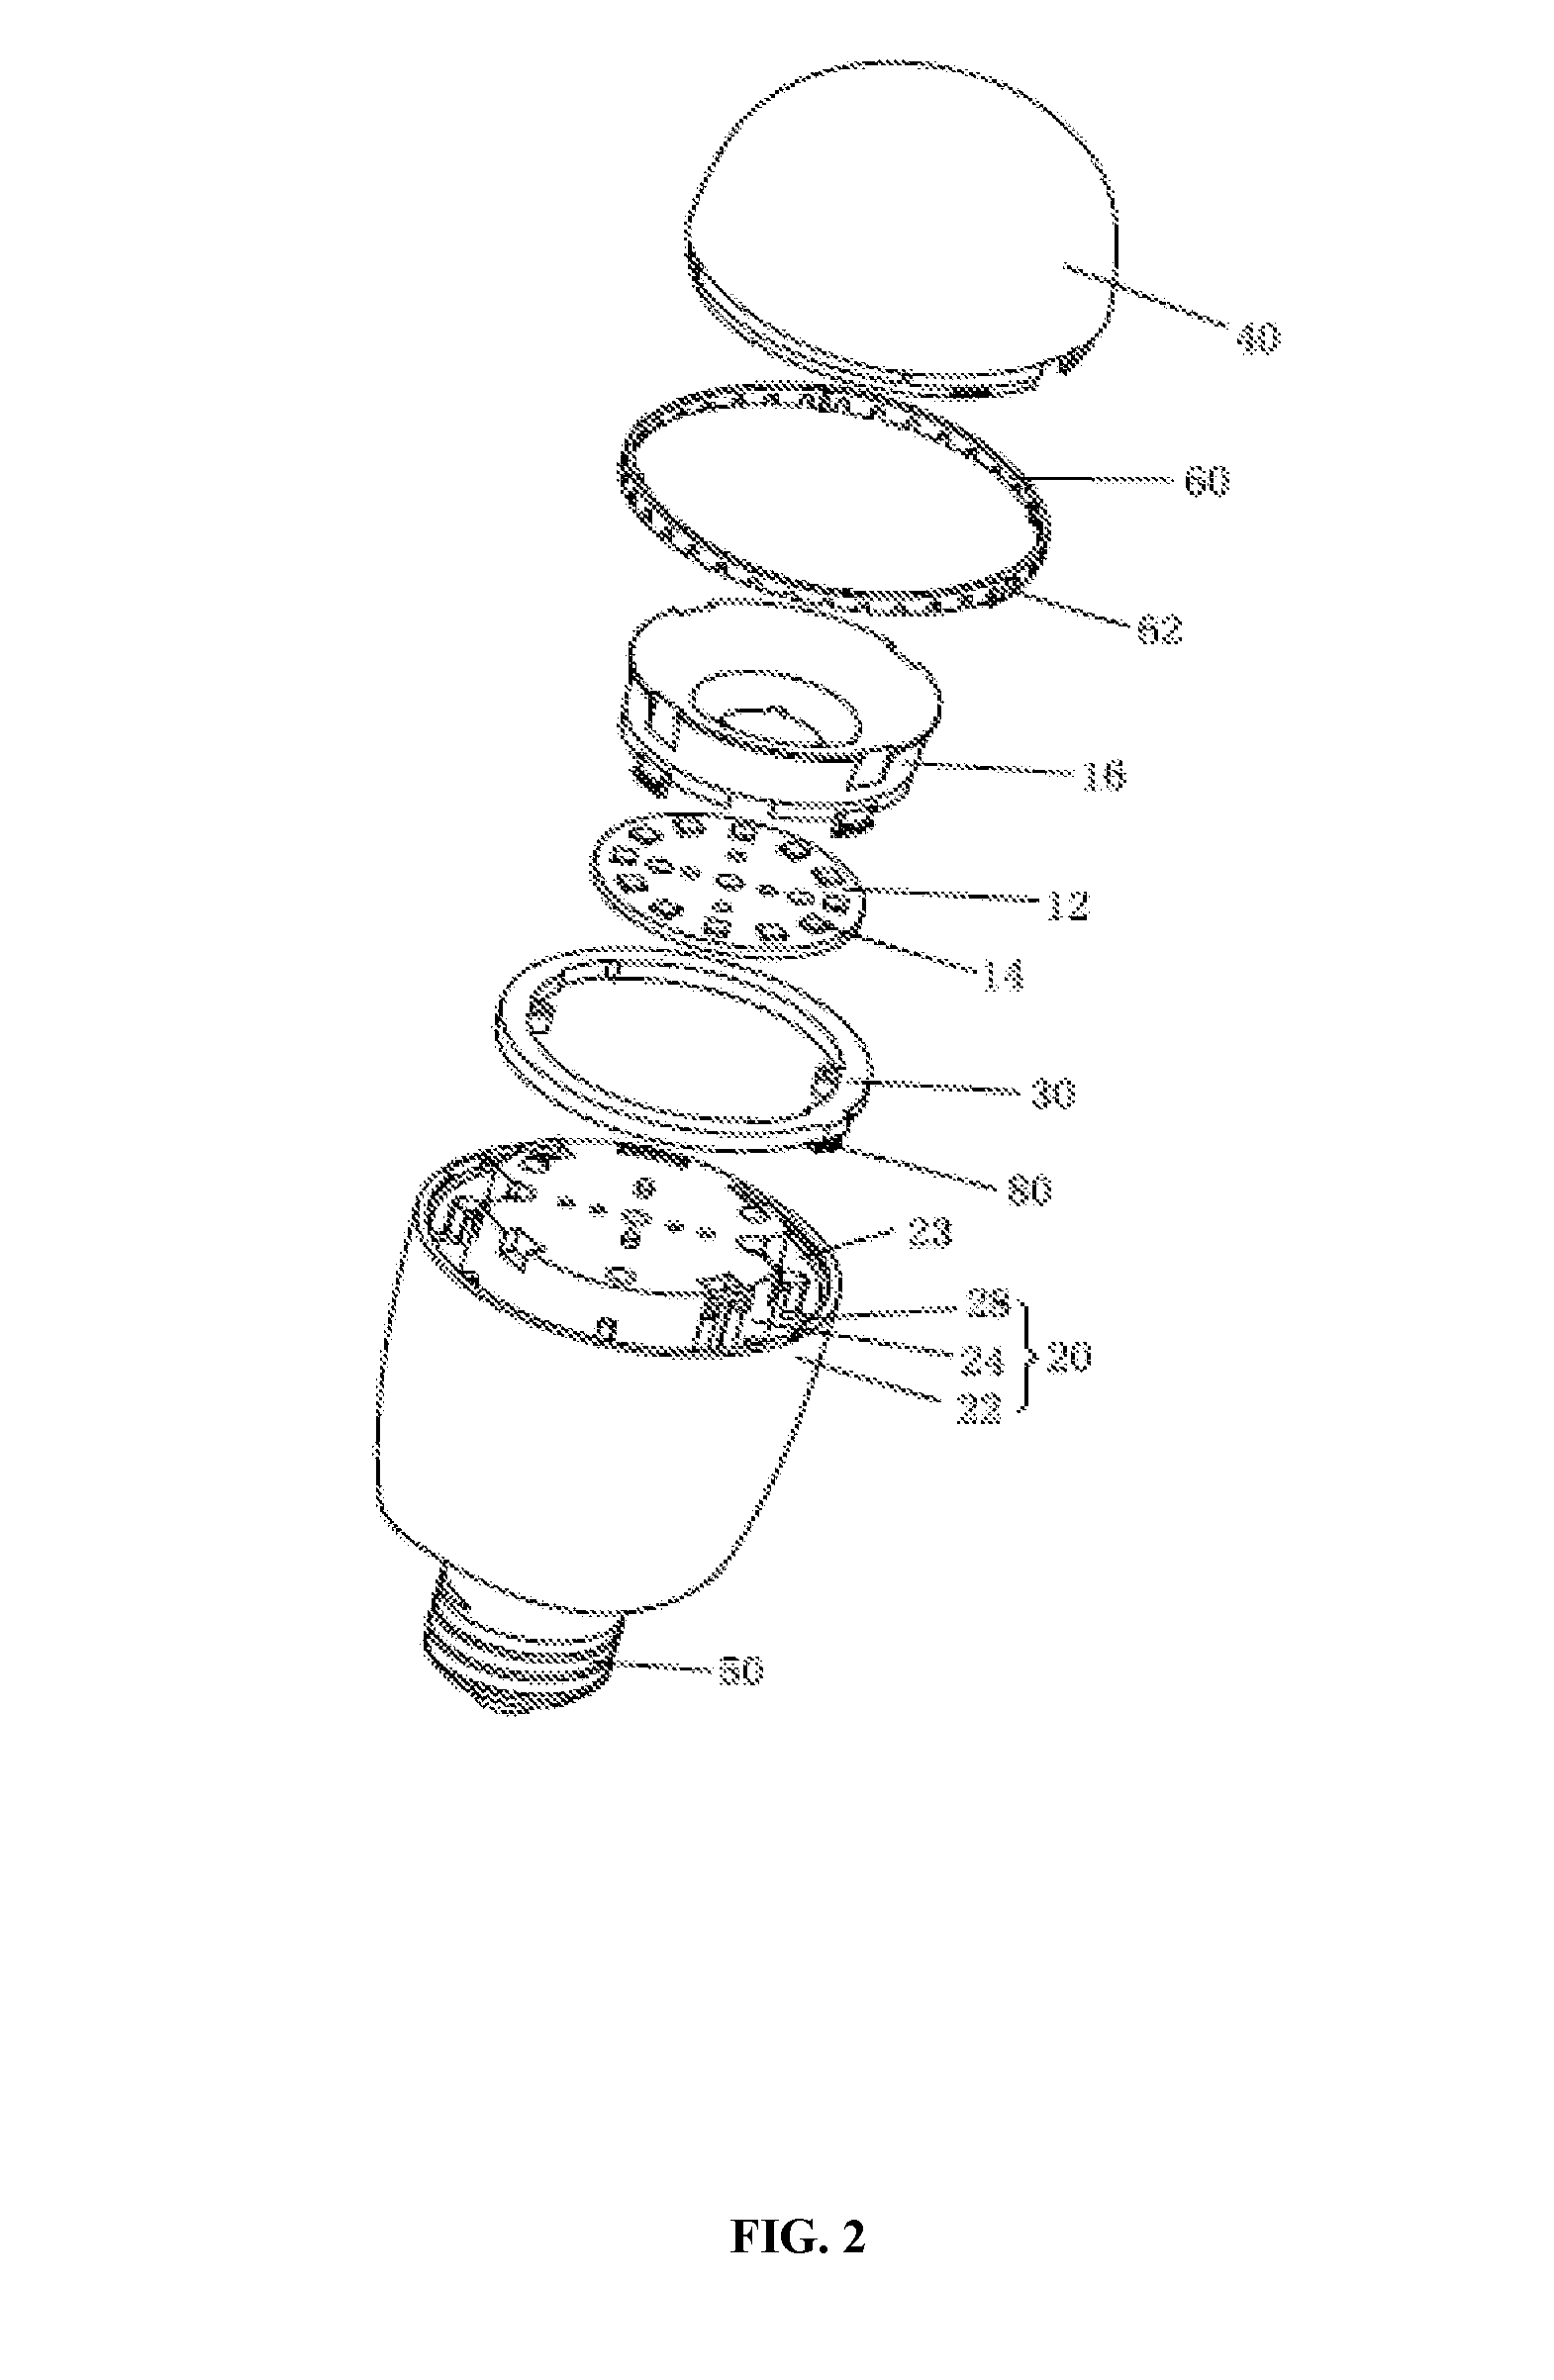 LED lighting device and system, and reset button arrangement method